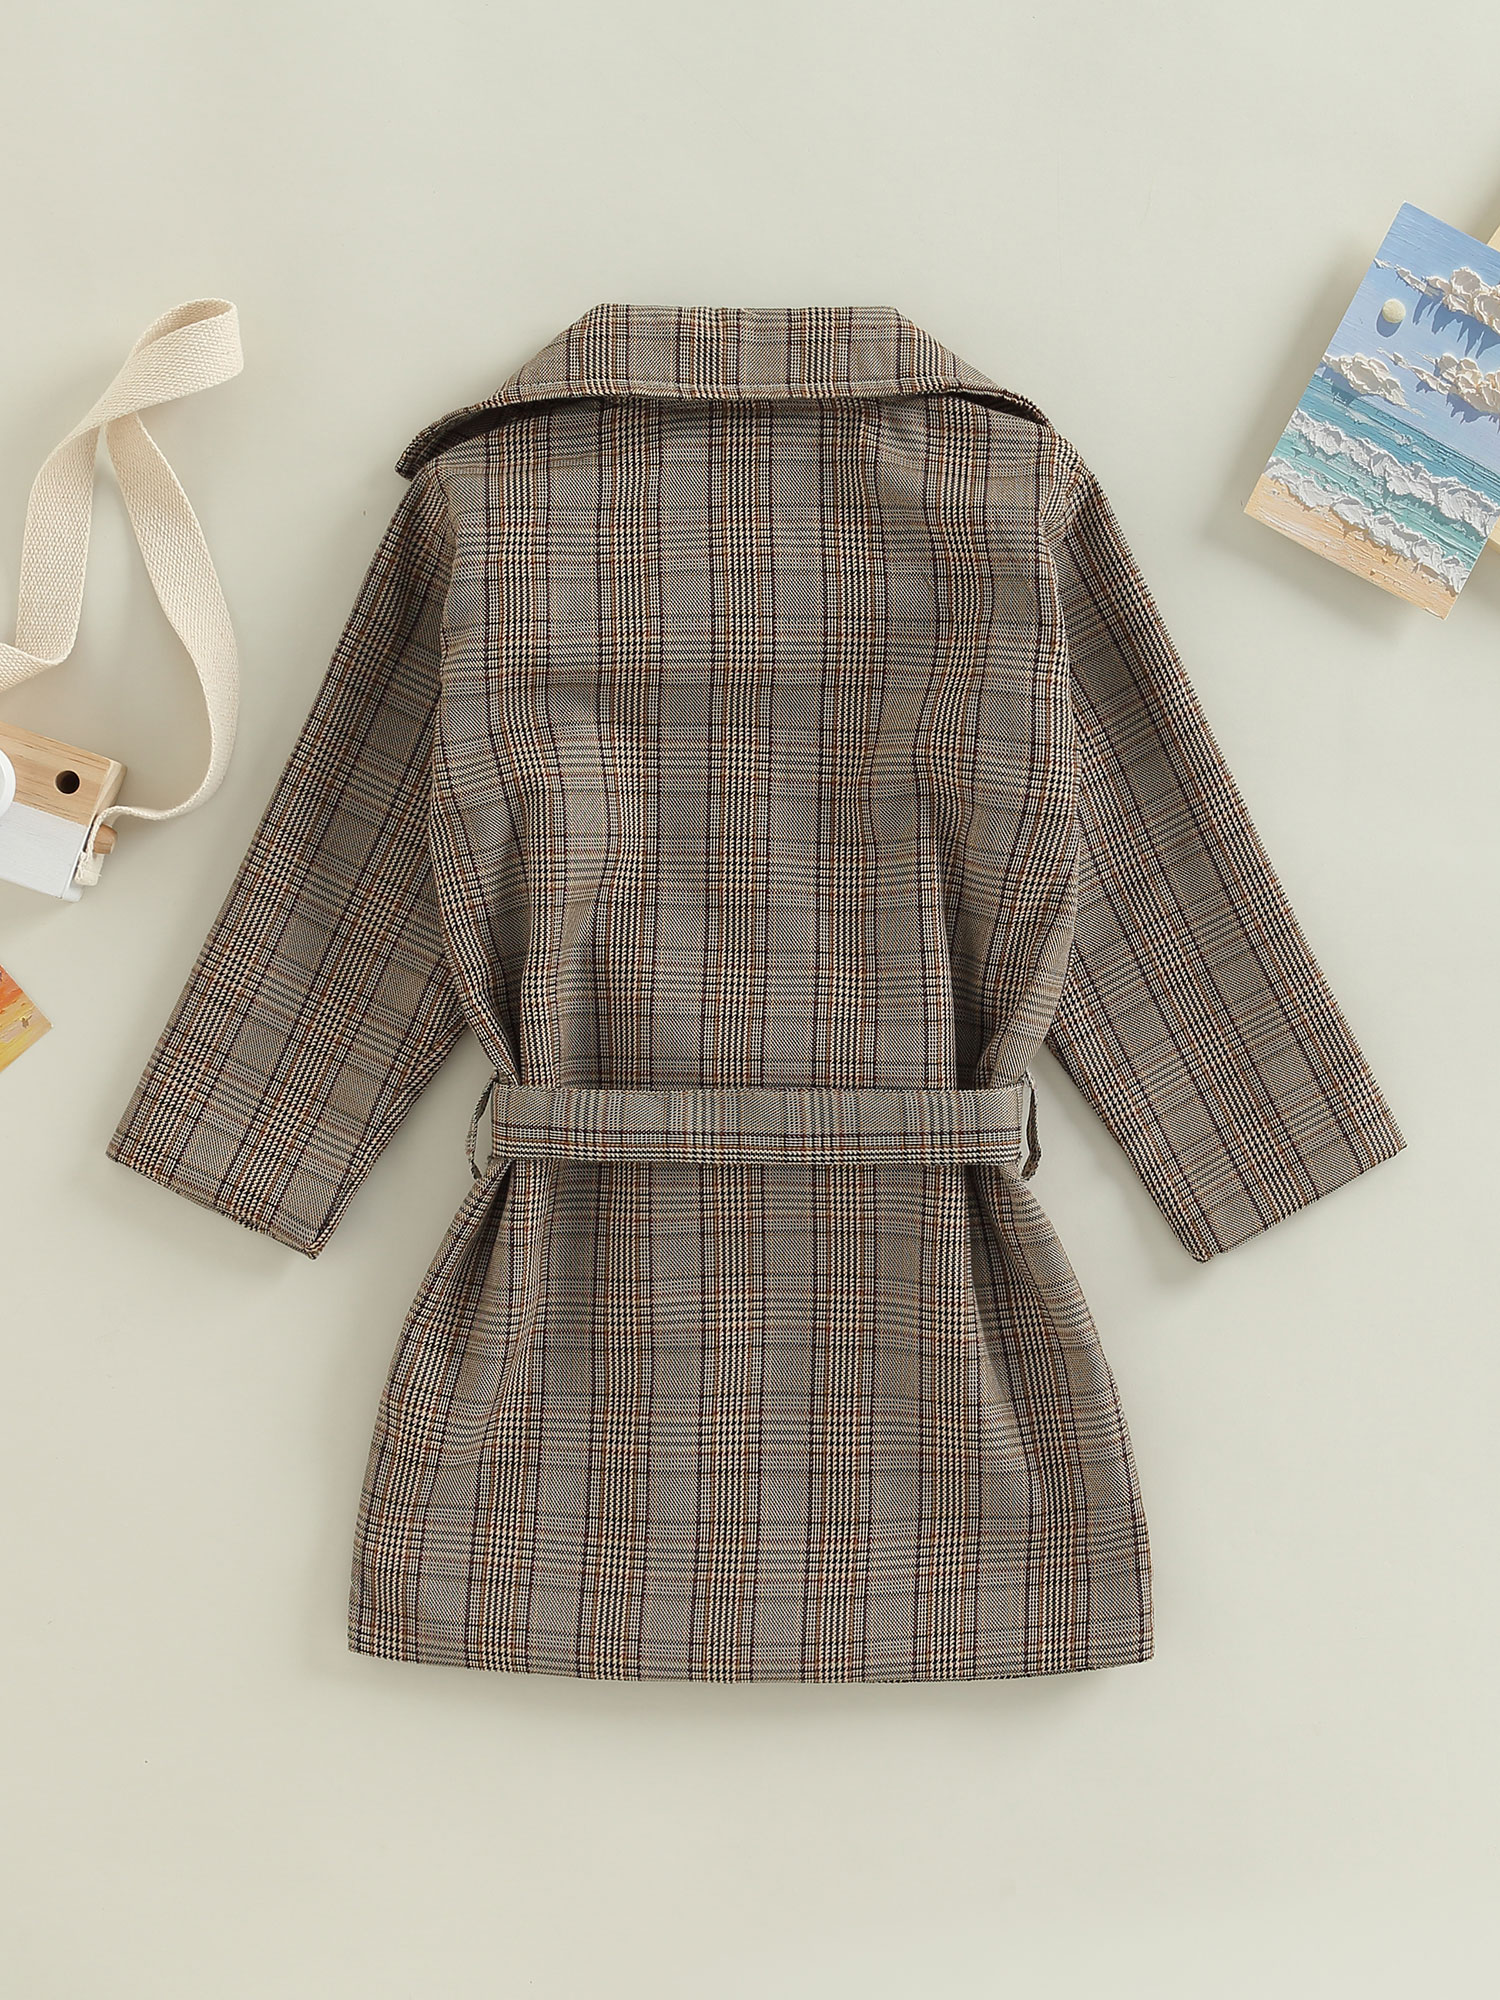 JYYYBF Toddler Baby Girl Trench Coat Long Sleeve Plaid Print Double-Breasted Belted Jacket Lapel Windbreaker Outerwear Grey 3-4 Years - image 5 of 7